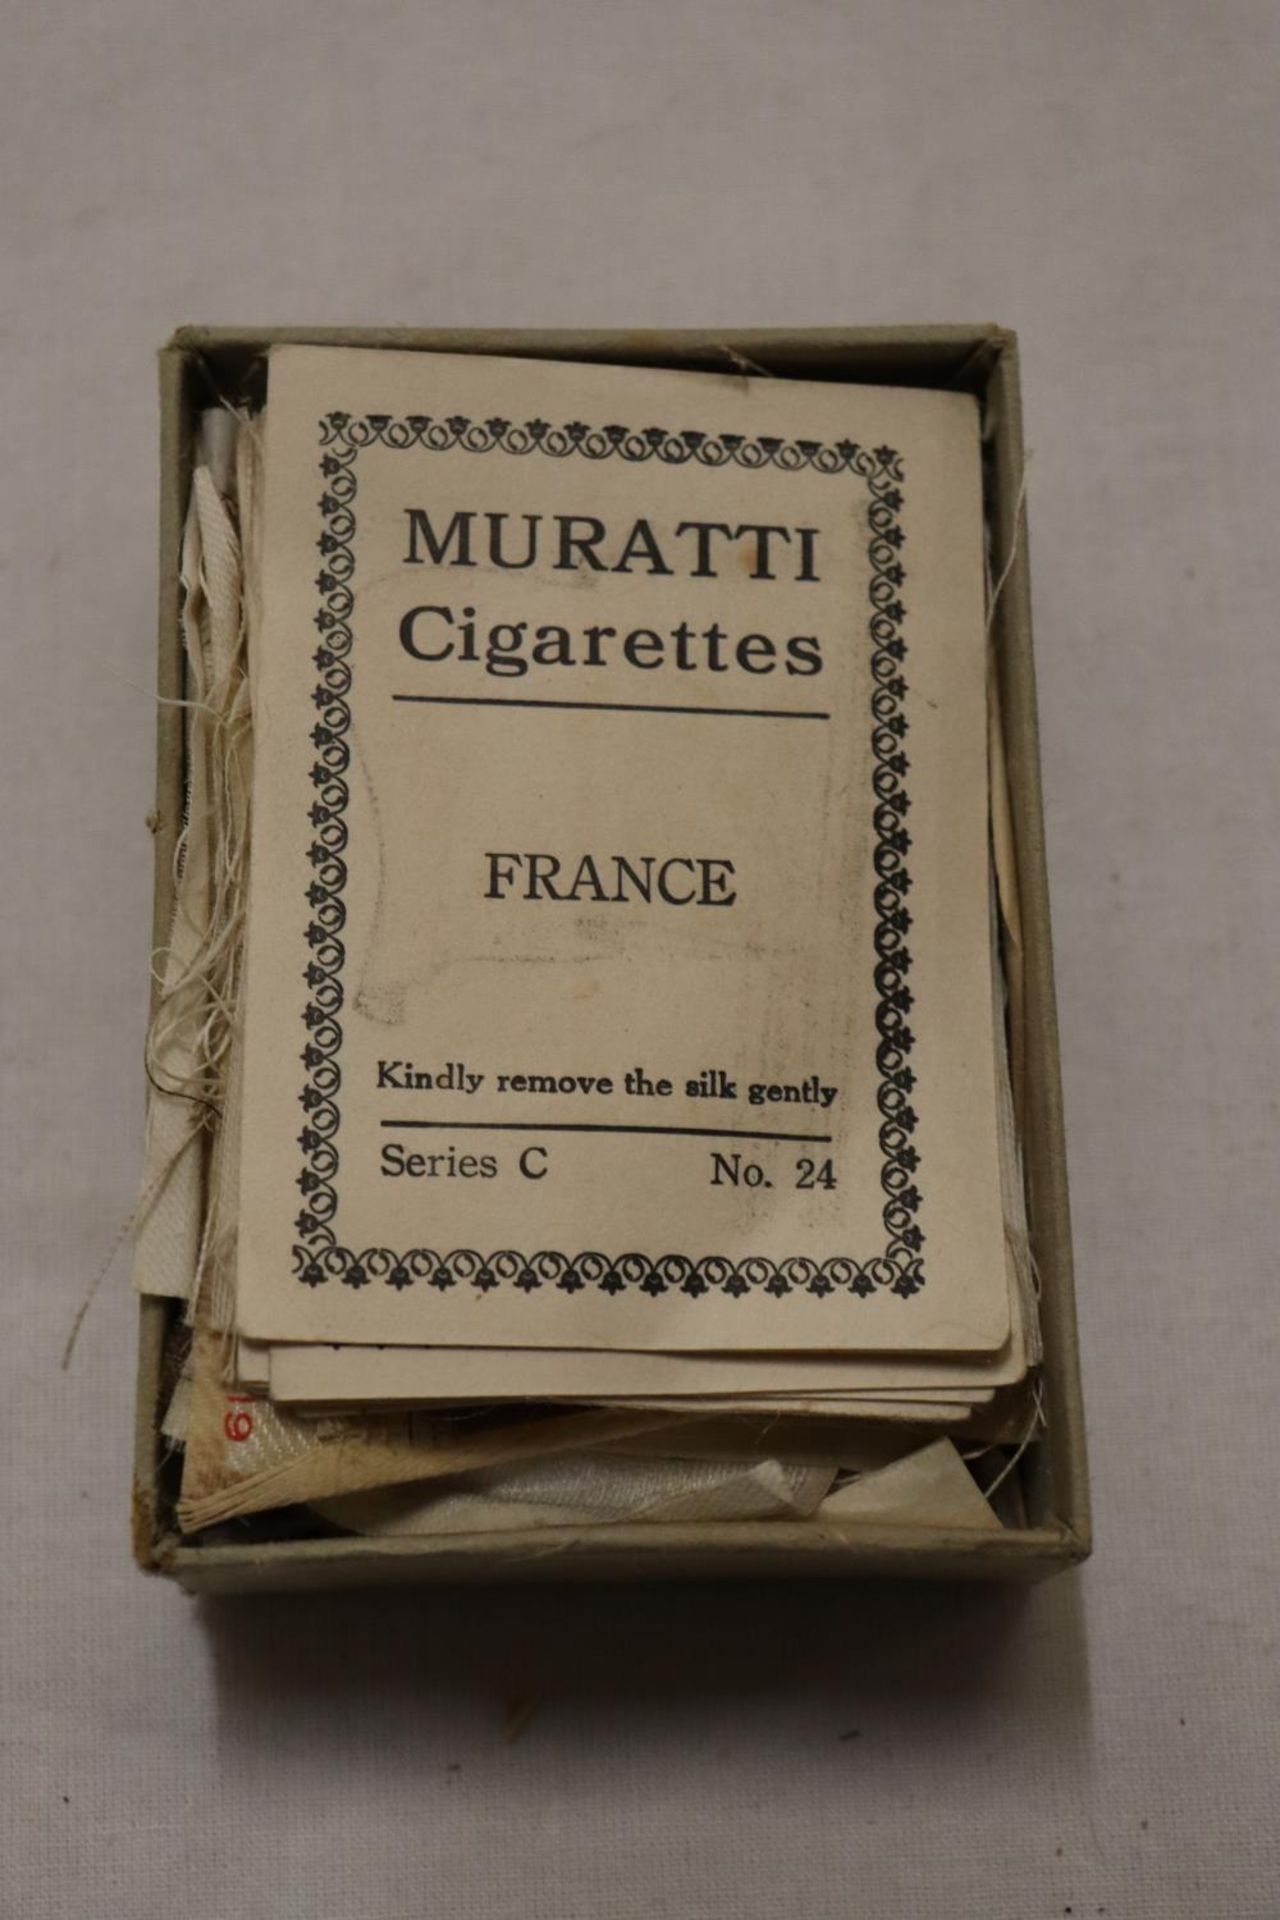 A BOX OF MURATTI CIGARETTES SILK CARDS CIRCA 1914, THE SILKS BEING FLAGS OF THE WORLD